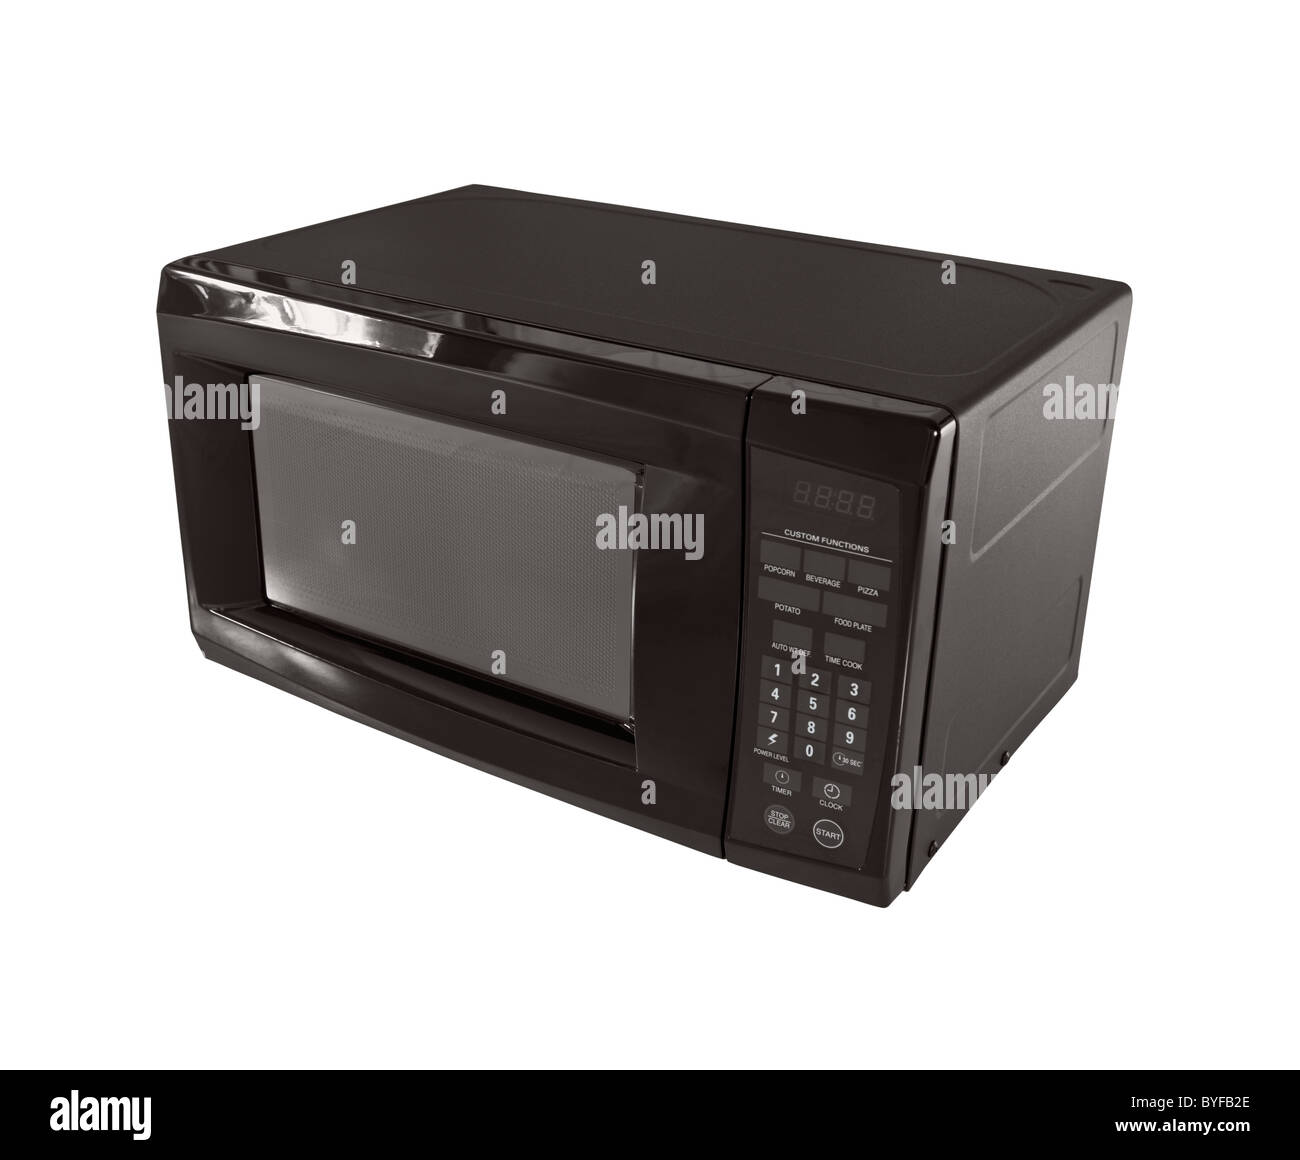 Small black common microwave oven isolated on white. Stock Photo